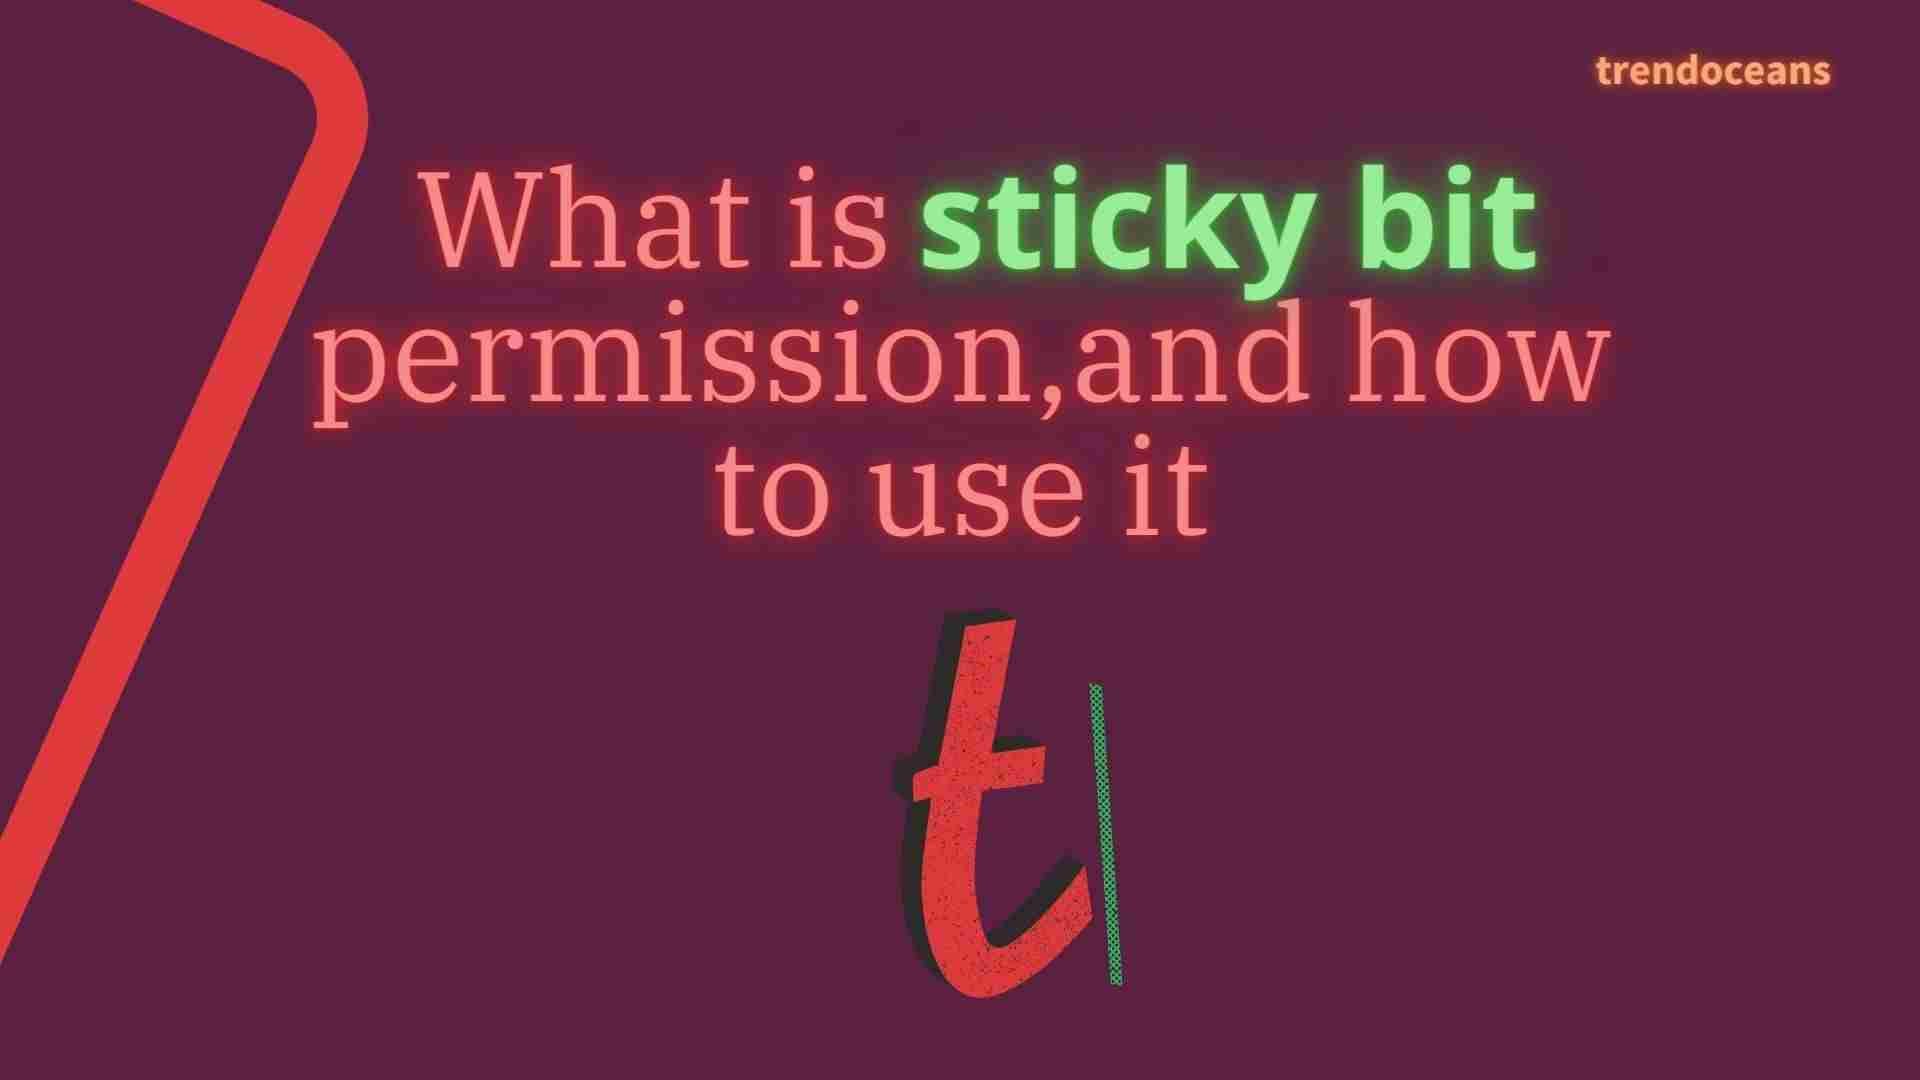 What is sticky bit and how to use